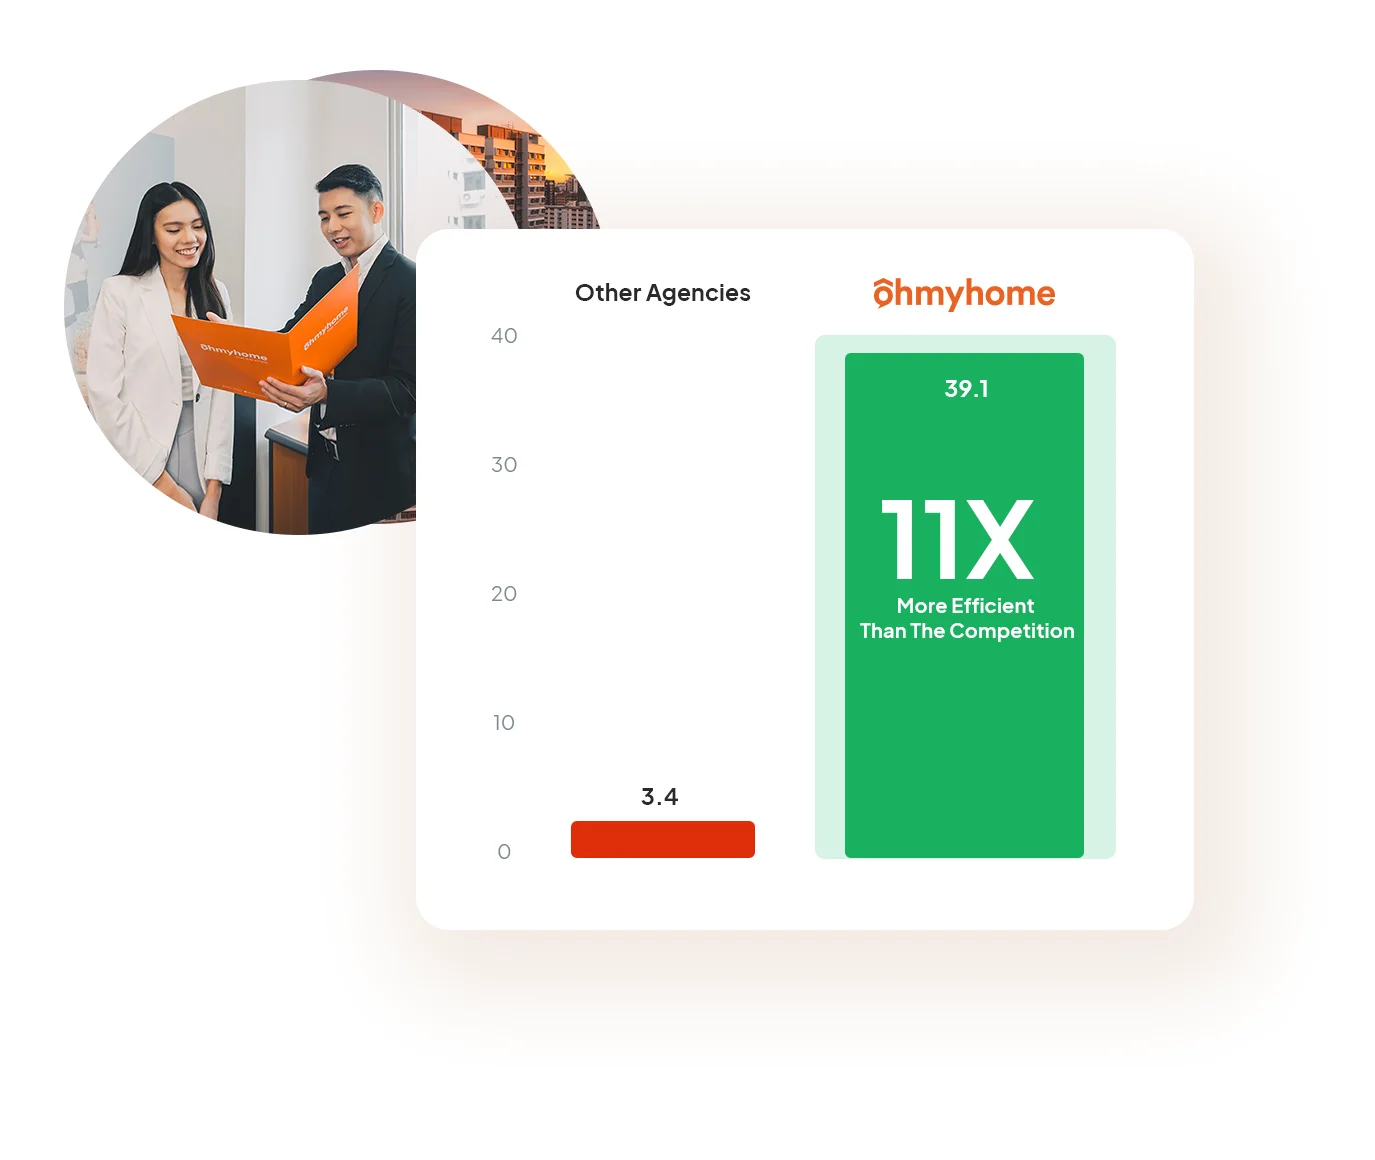 Ohmyhome's agents transact 11x more efficient than the industry average